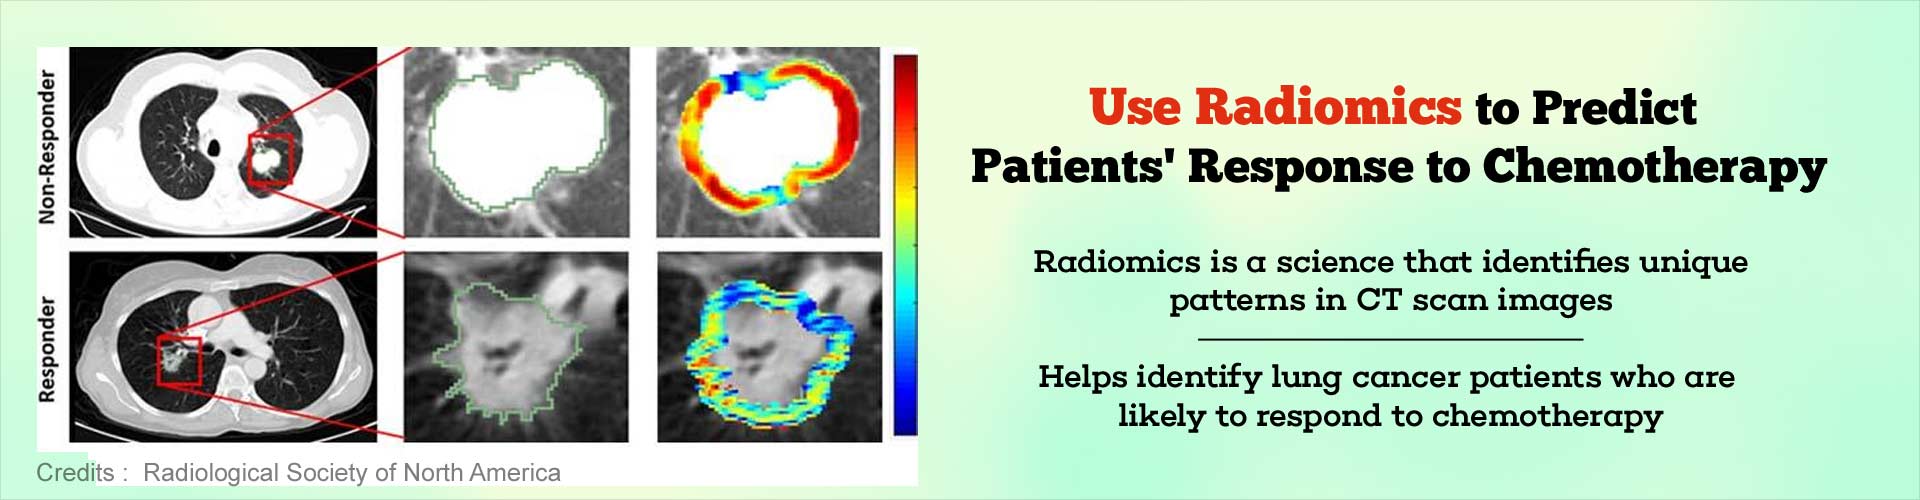 Use Radiomics to predict patients' response to chemotherapy. Radiomics is a science that identifies unique patterns in CT scan images. Helps identify lung cancer patients who are likely to respond to chemotherapy.